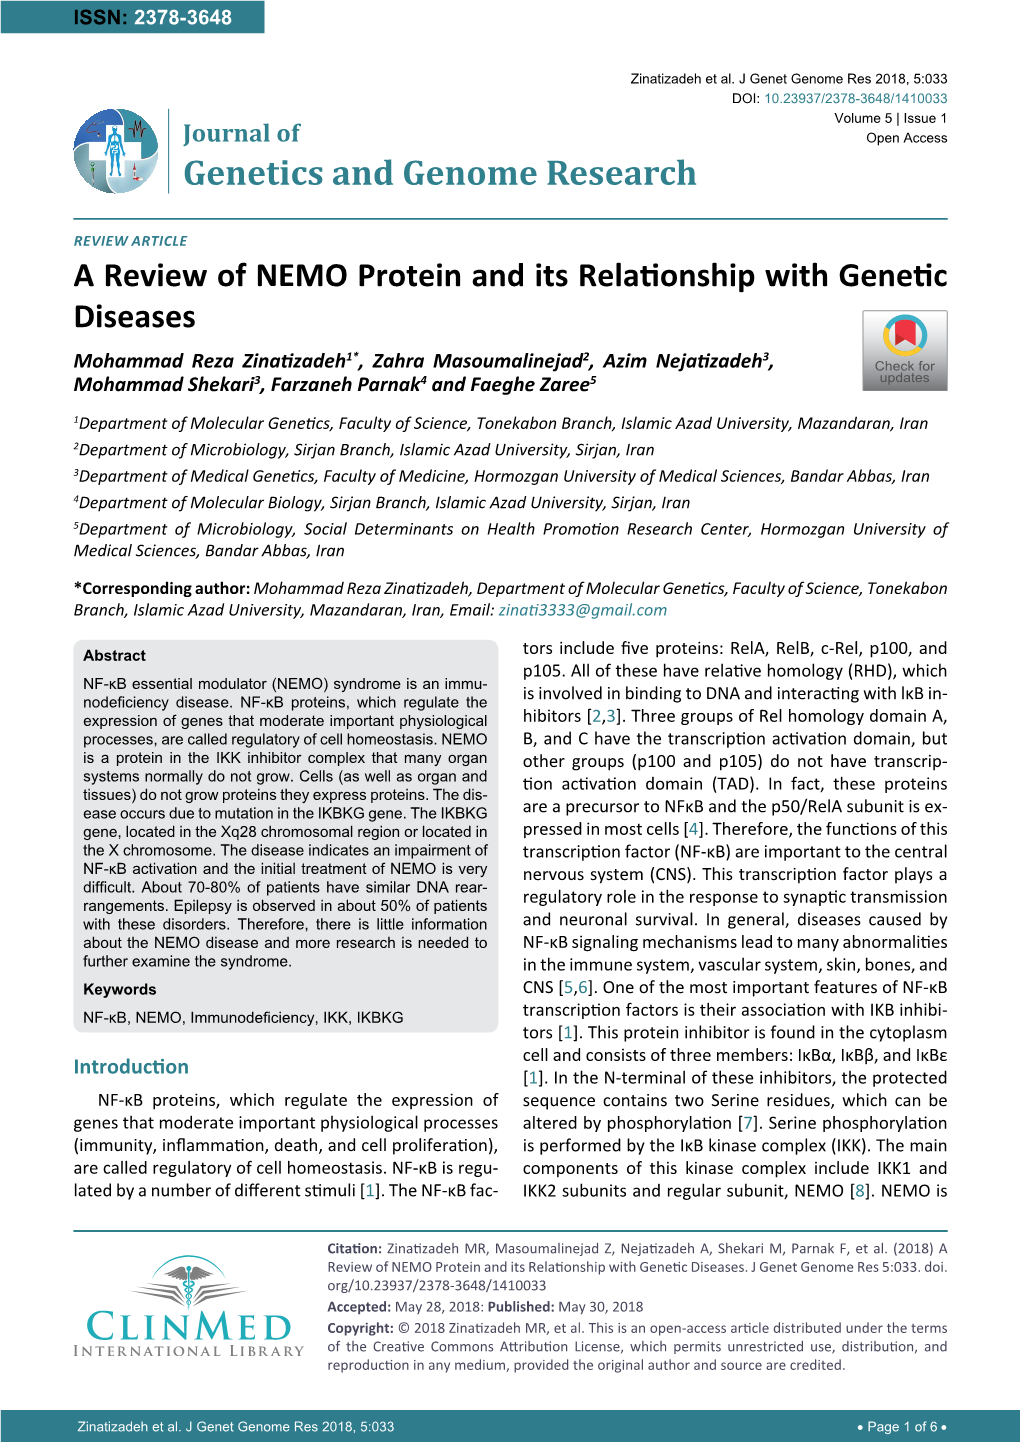 A Review of NEMO Protein and Its Relationship with Genetic Diseases